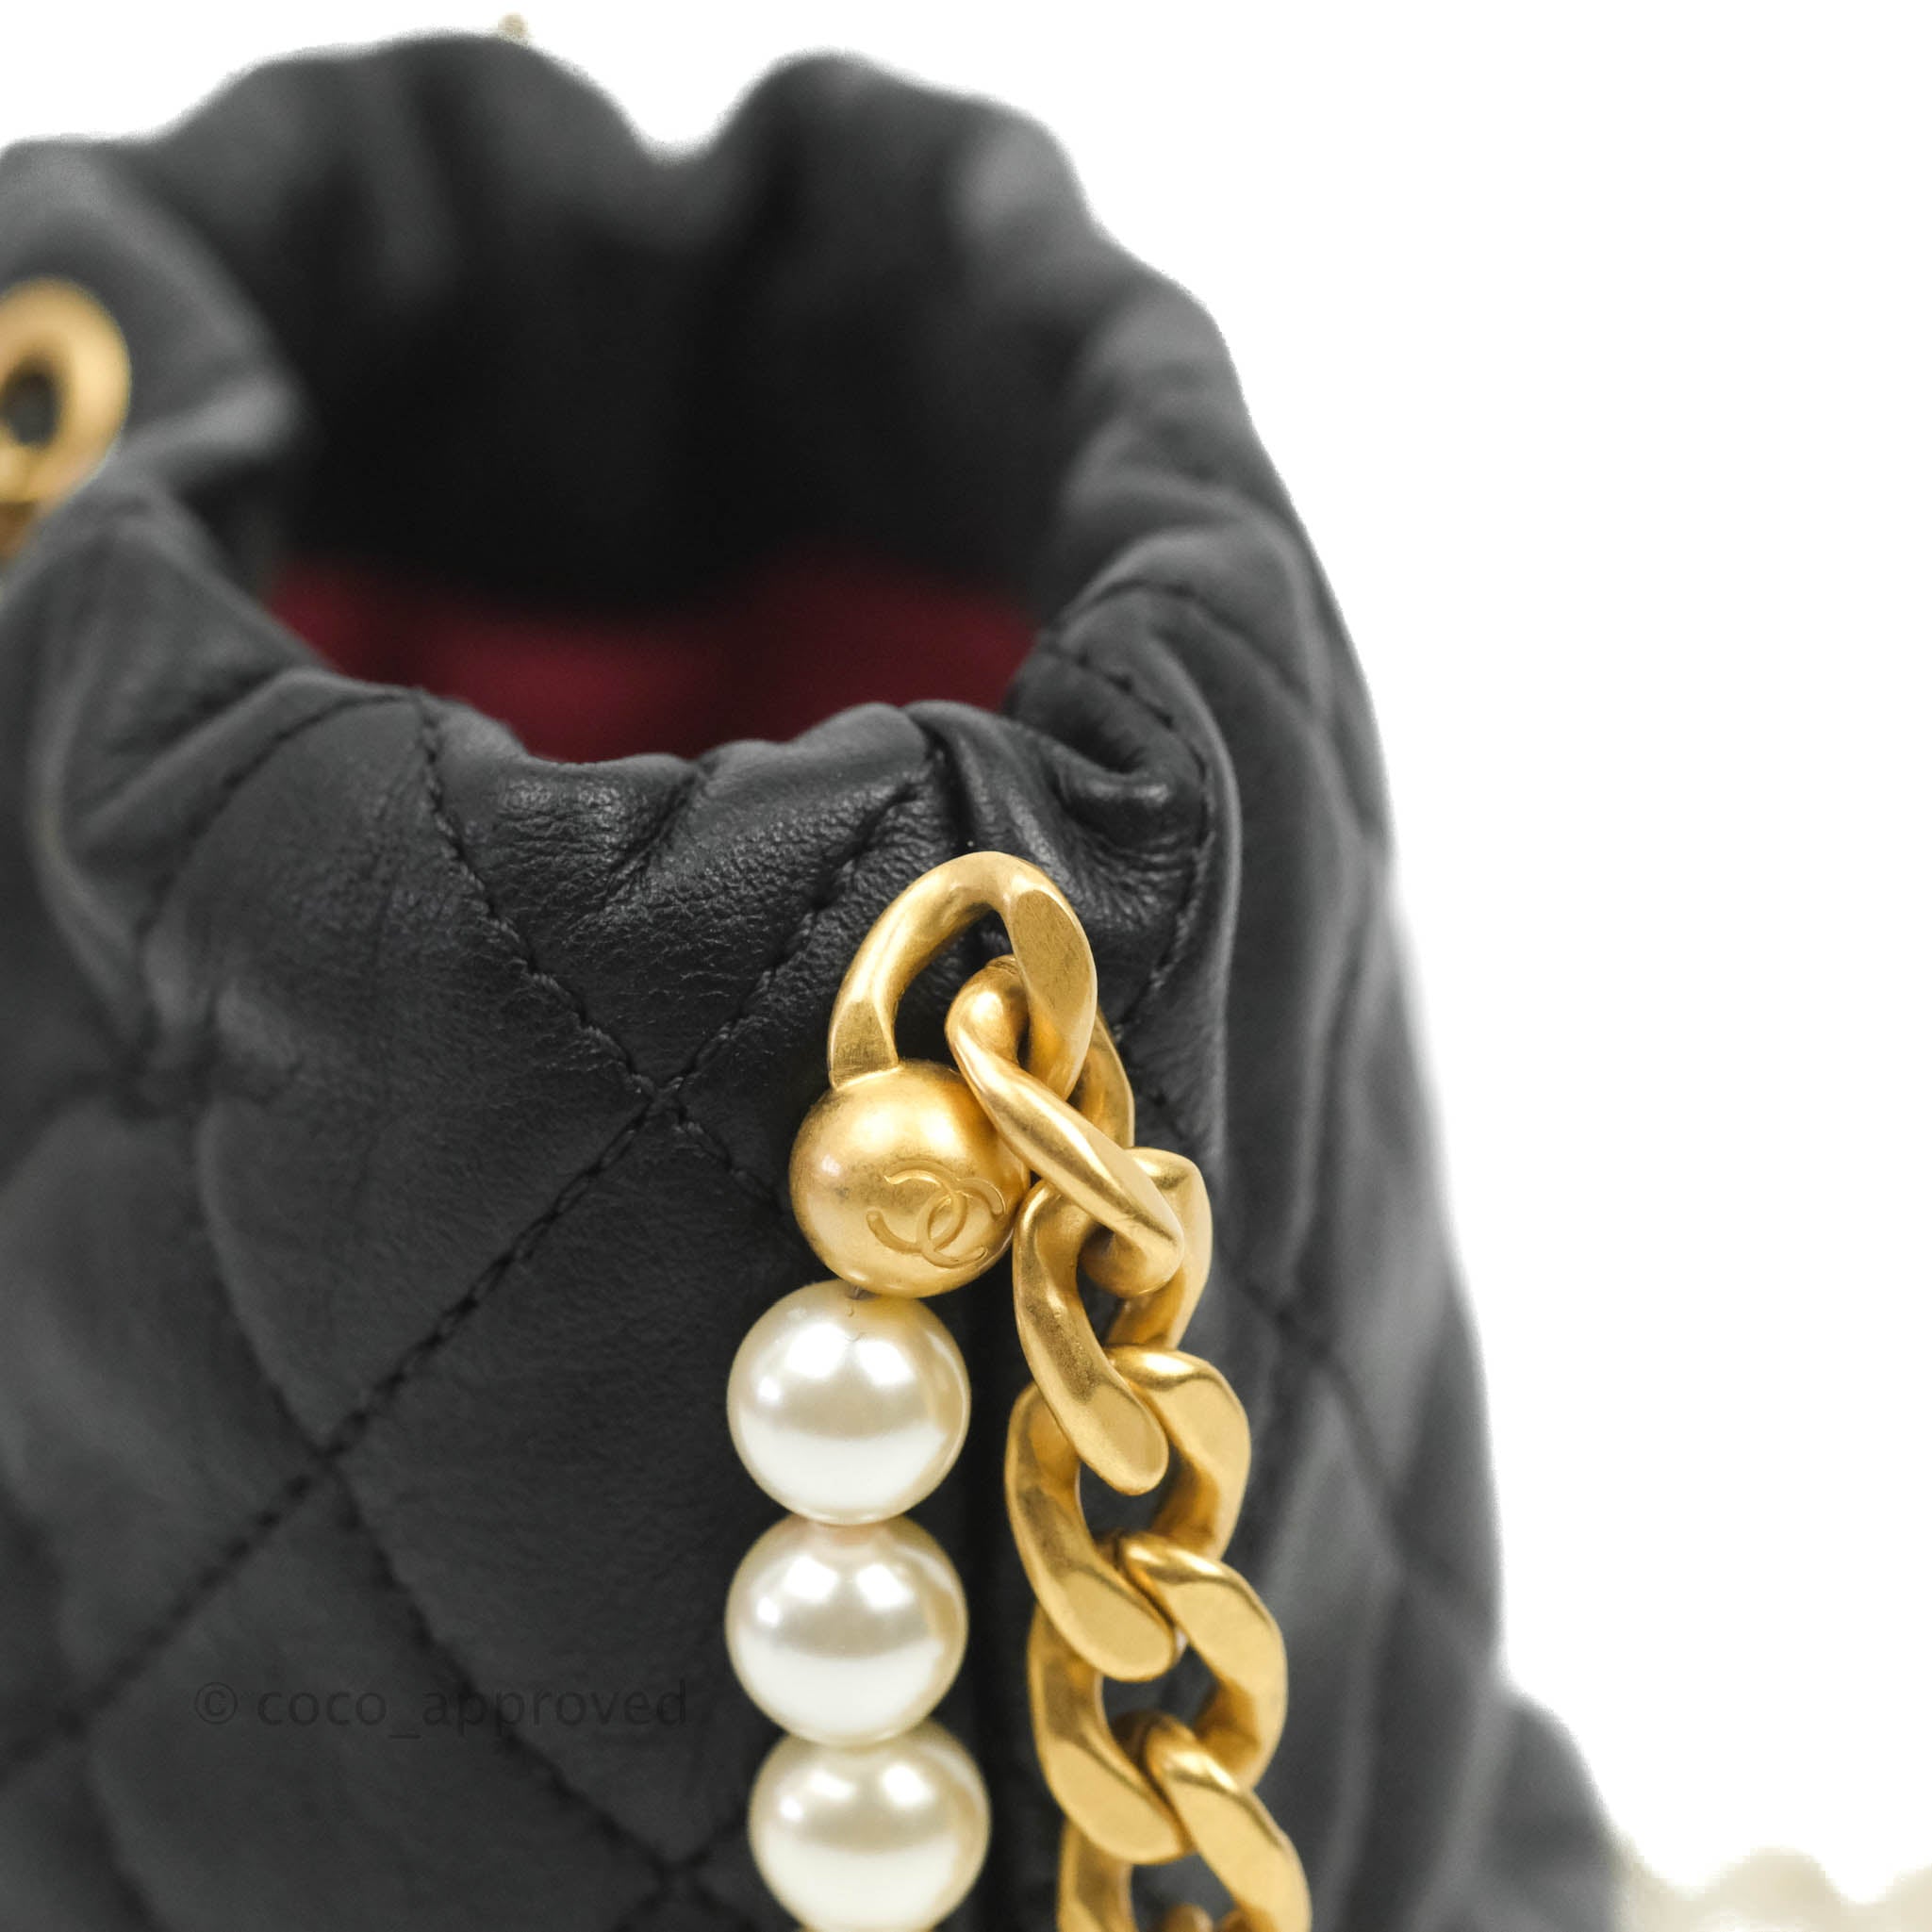 Chanel 2021 Black Quilted Lambskin Leather Pearl Drawstring Bucket Bag